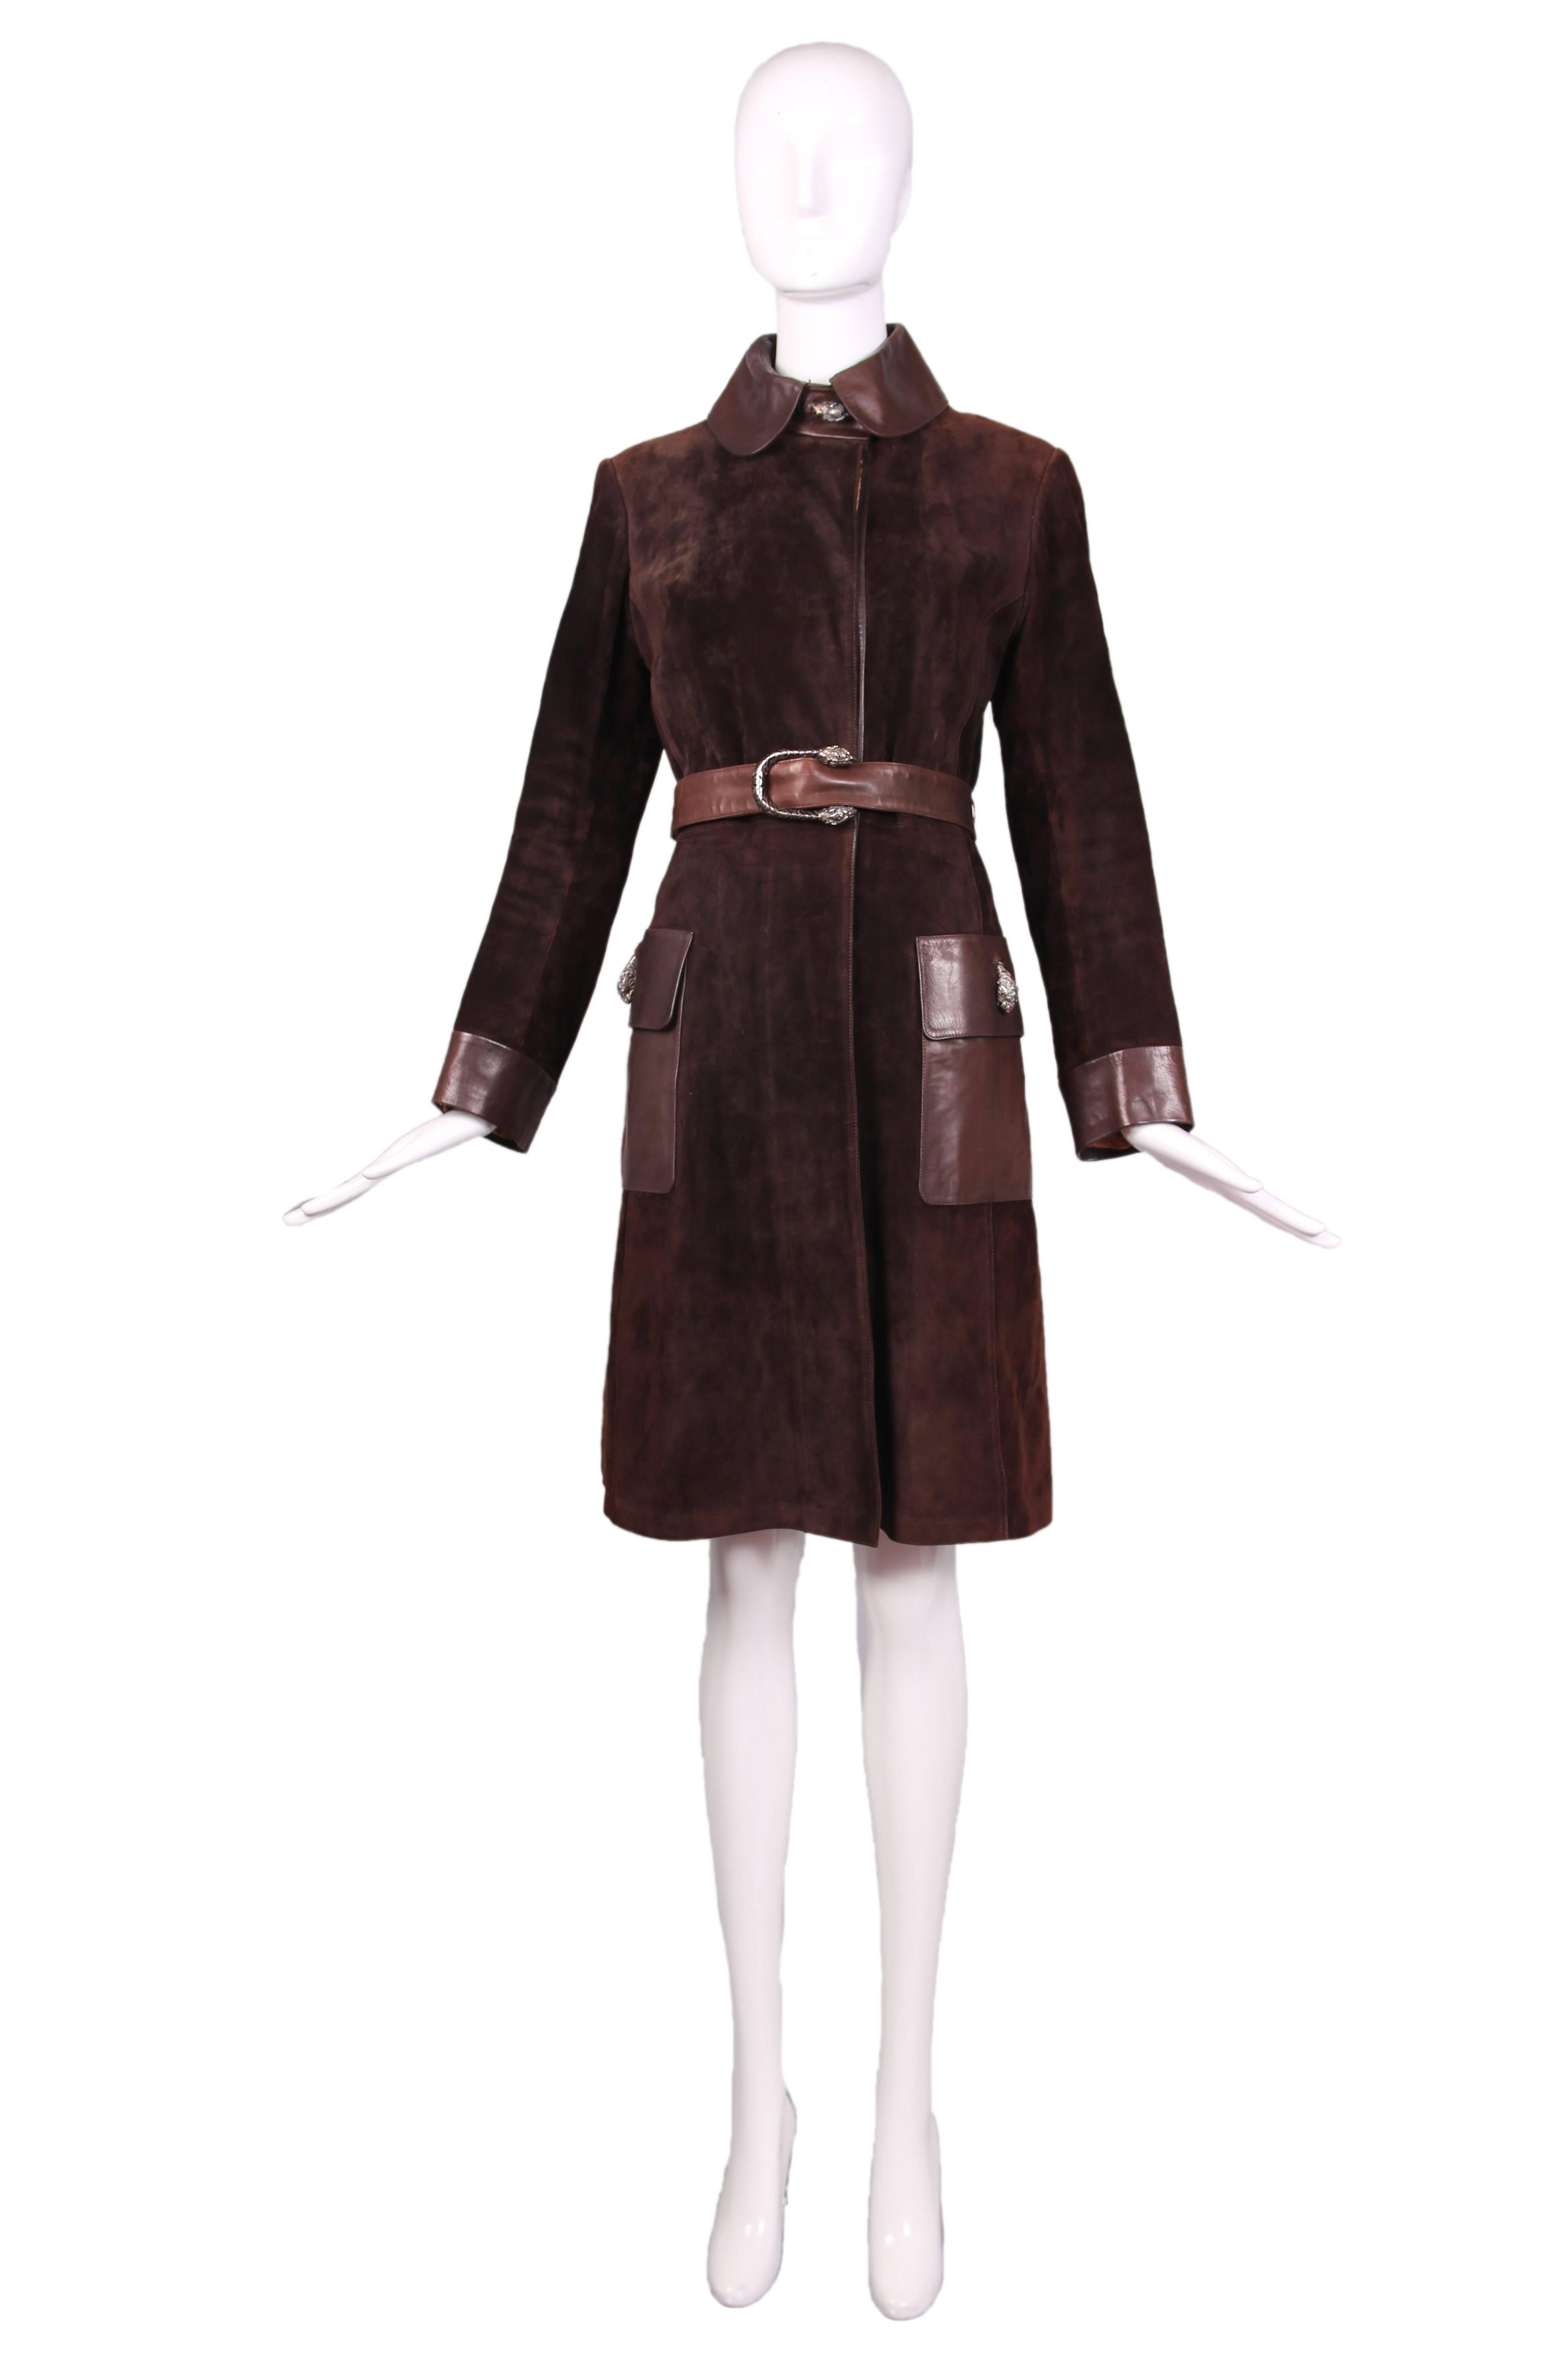 1970's Gucci brown suede coat with leather belt, trim, collar, cuffs, and two frontal pockets. Decorative sterling silver & enamel tiger heads at neck closure, patch pockets, and belt. Fully lined in silk with Gucci logo pattern. In excellent